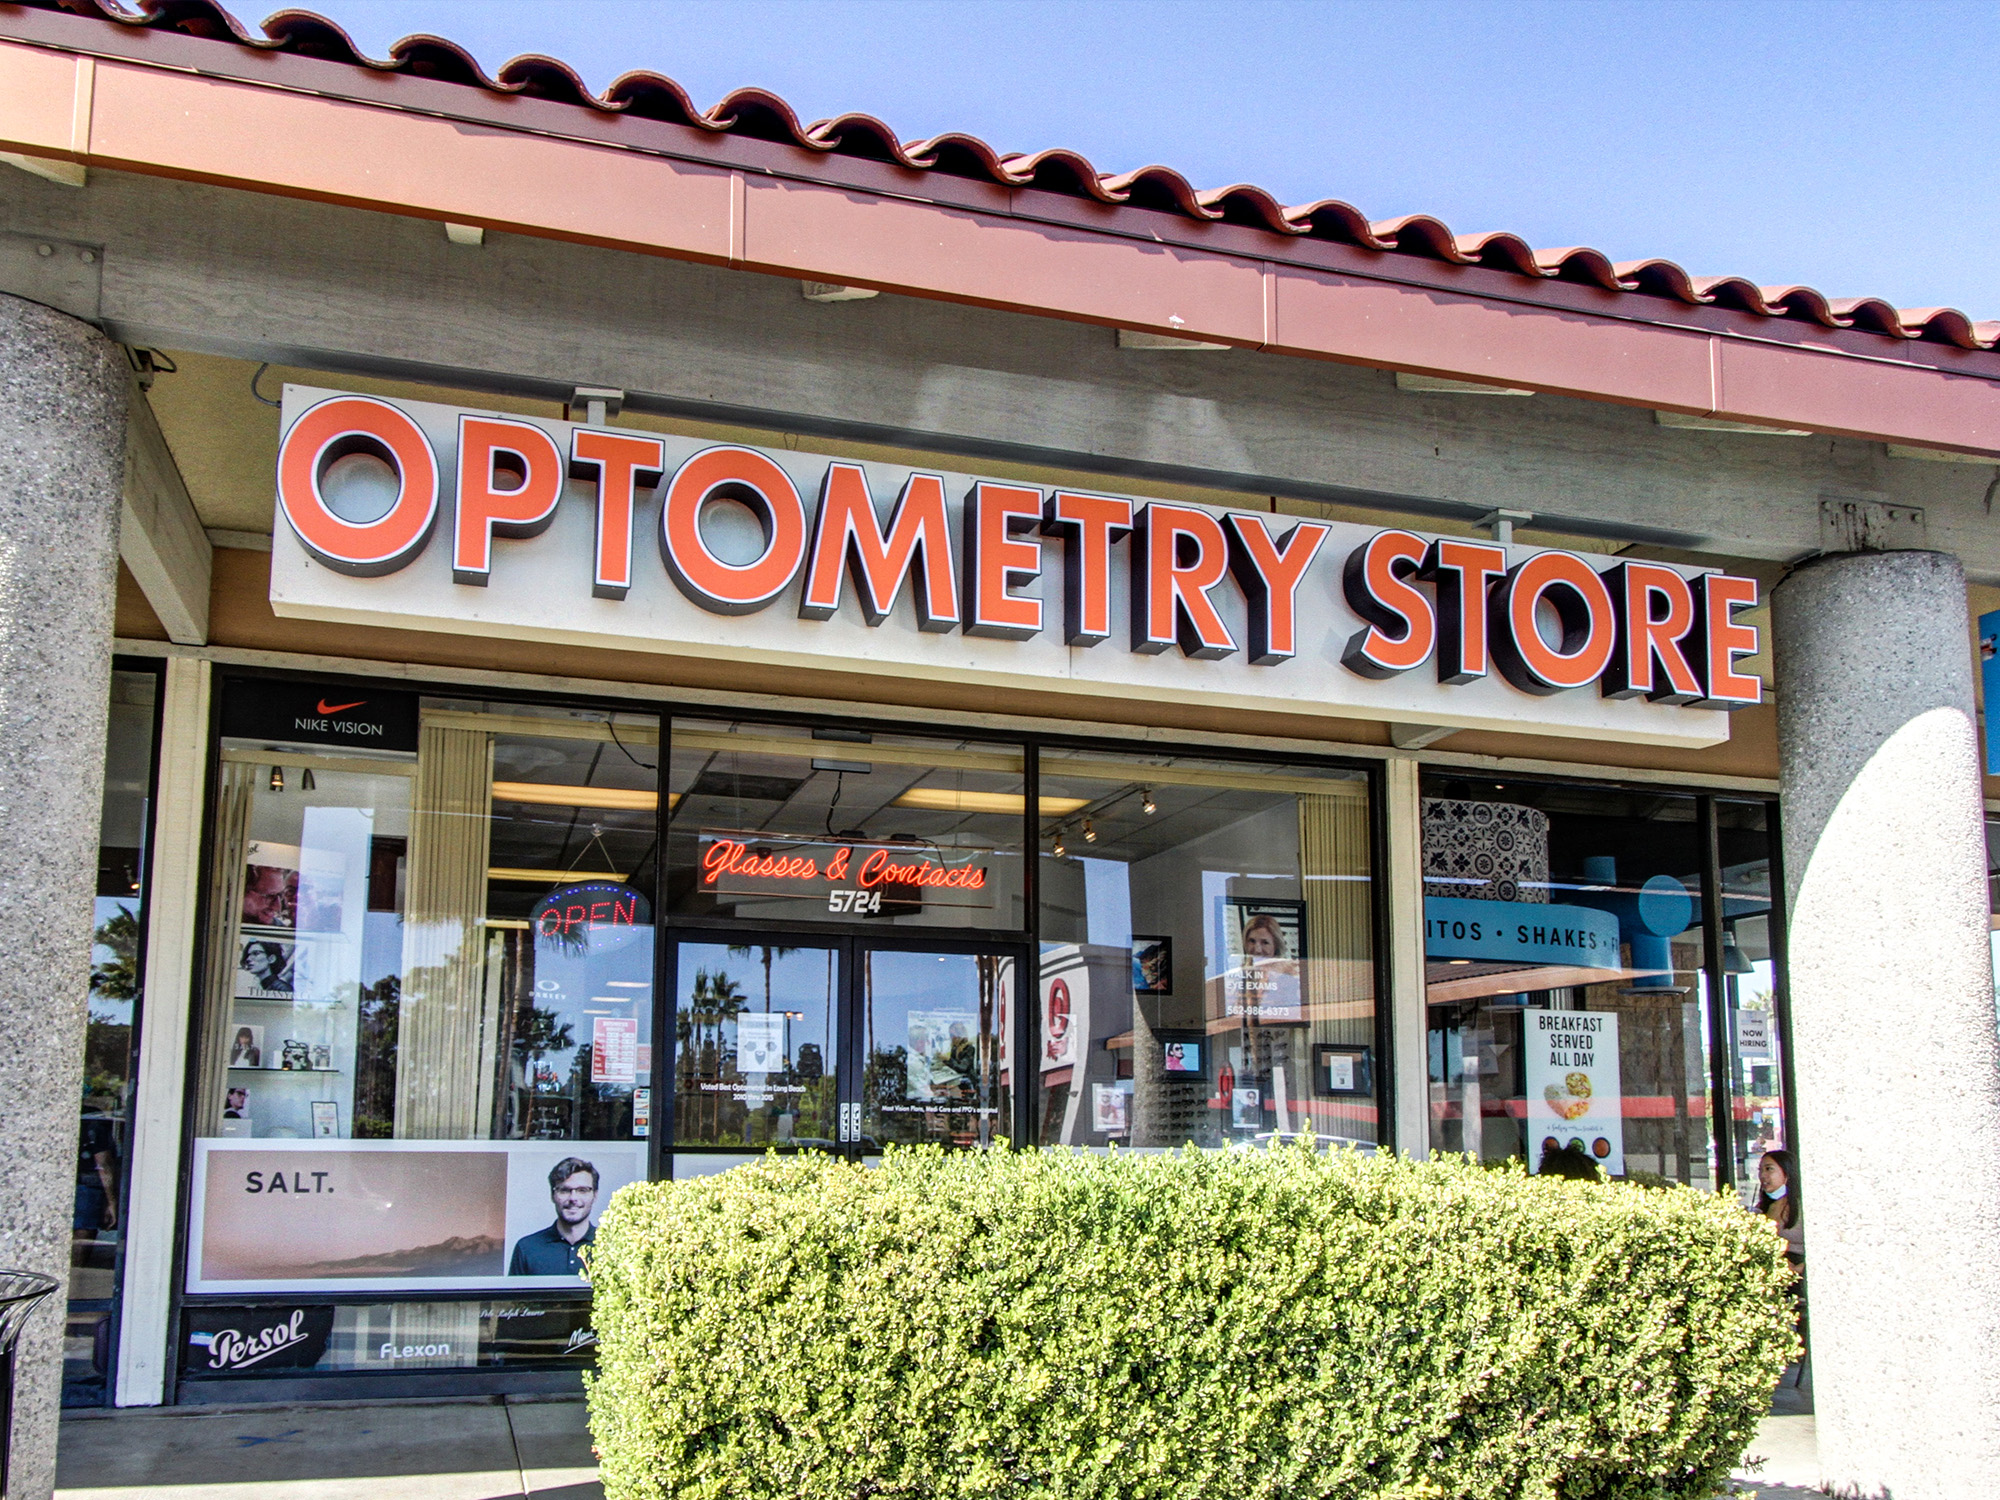 Optometry Store  Dr. Tania Stevens | Optical Lenses, Emergency Walkin and Contact Lenses